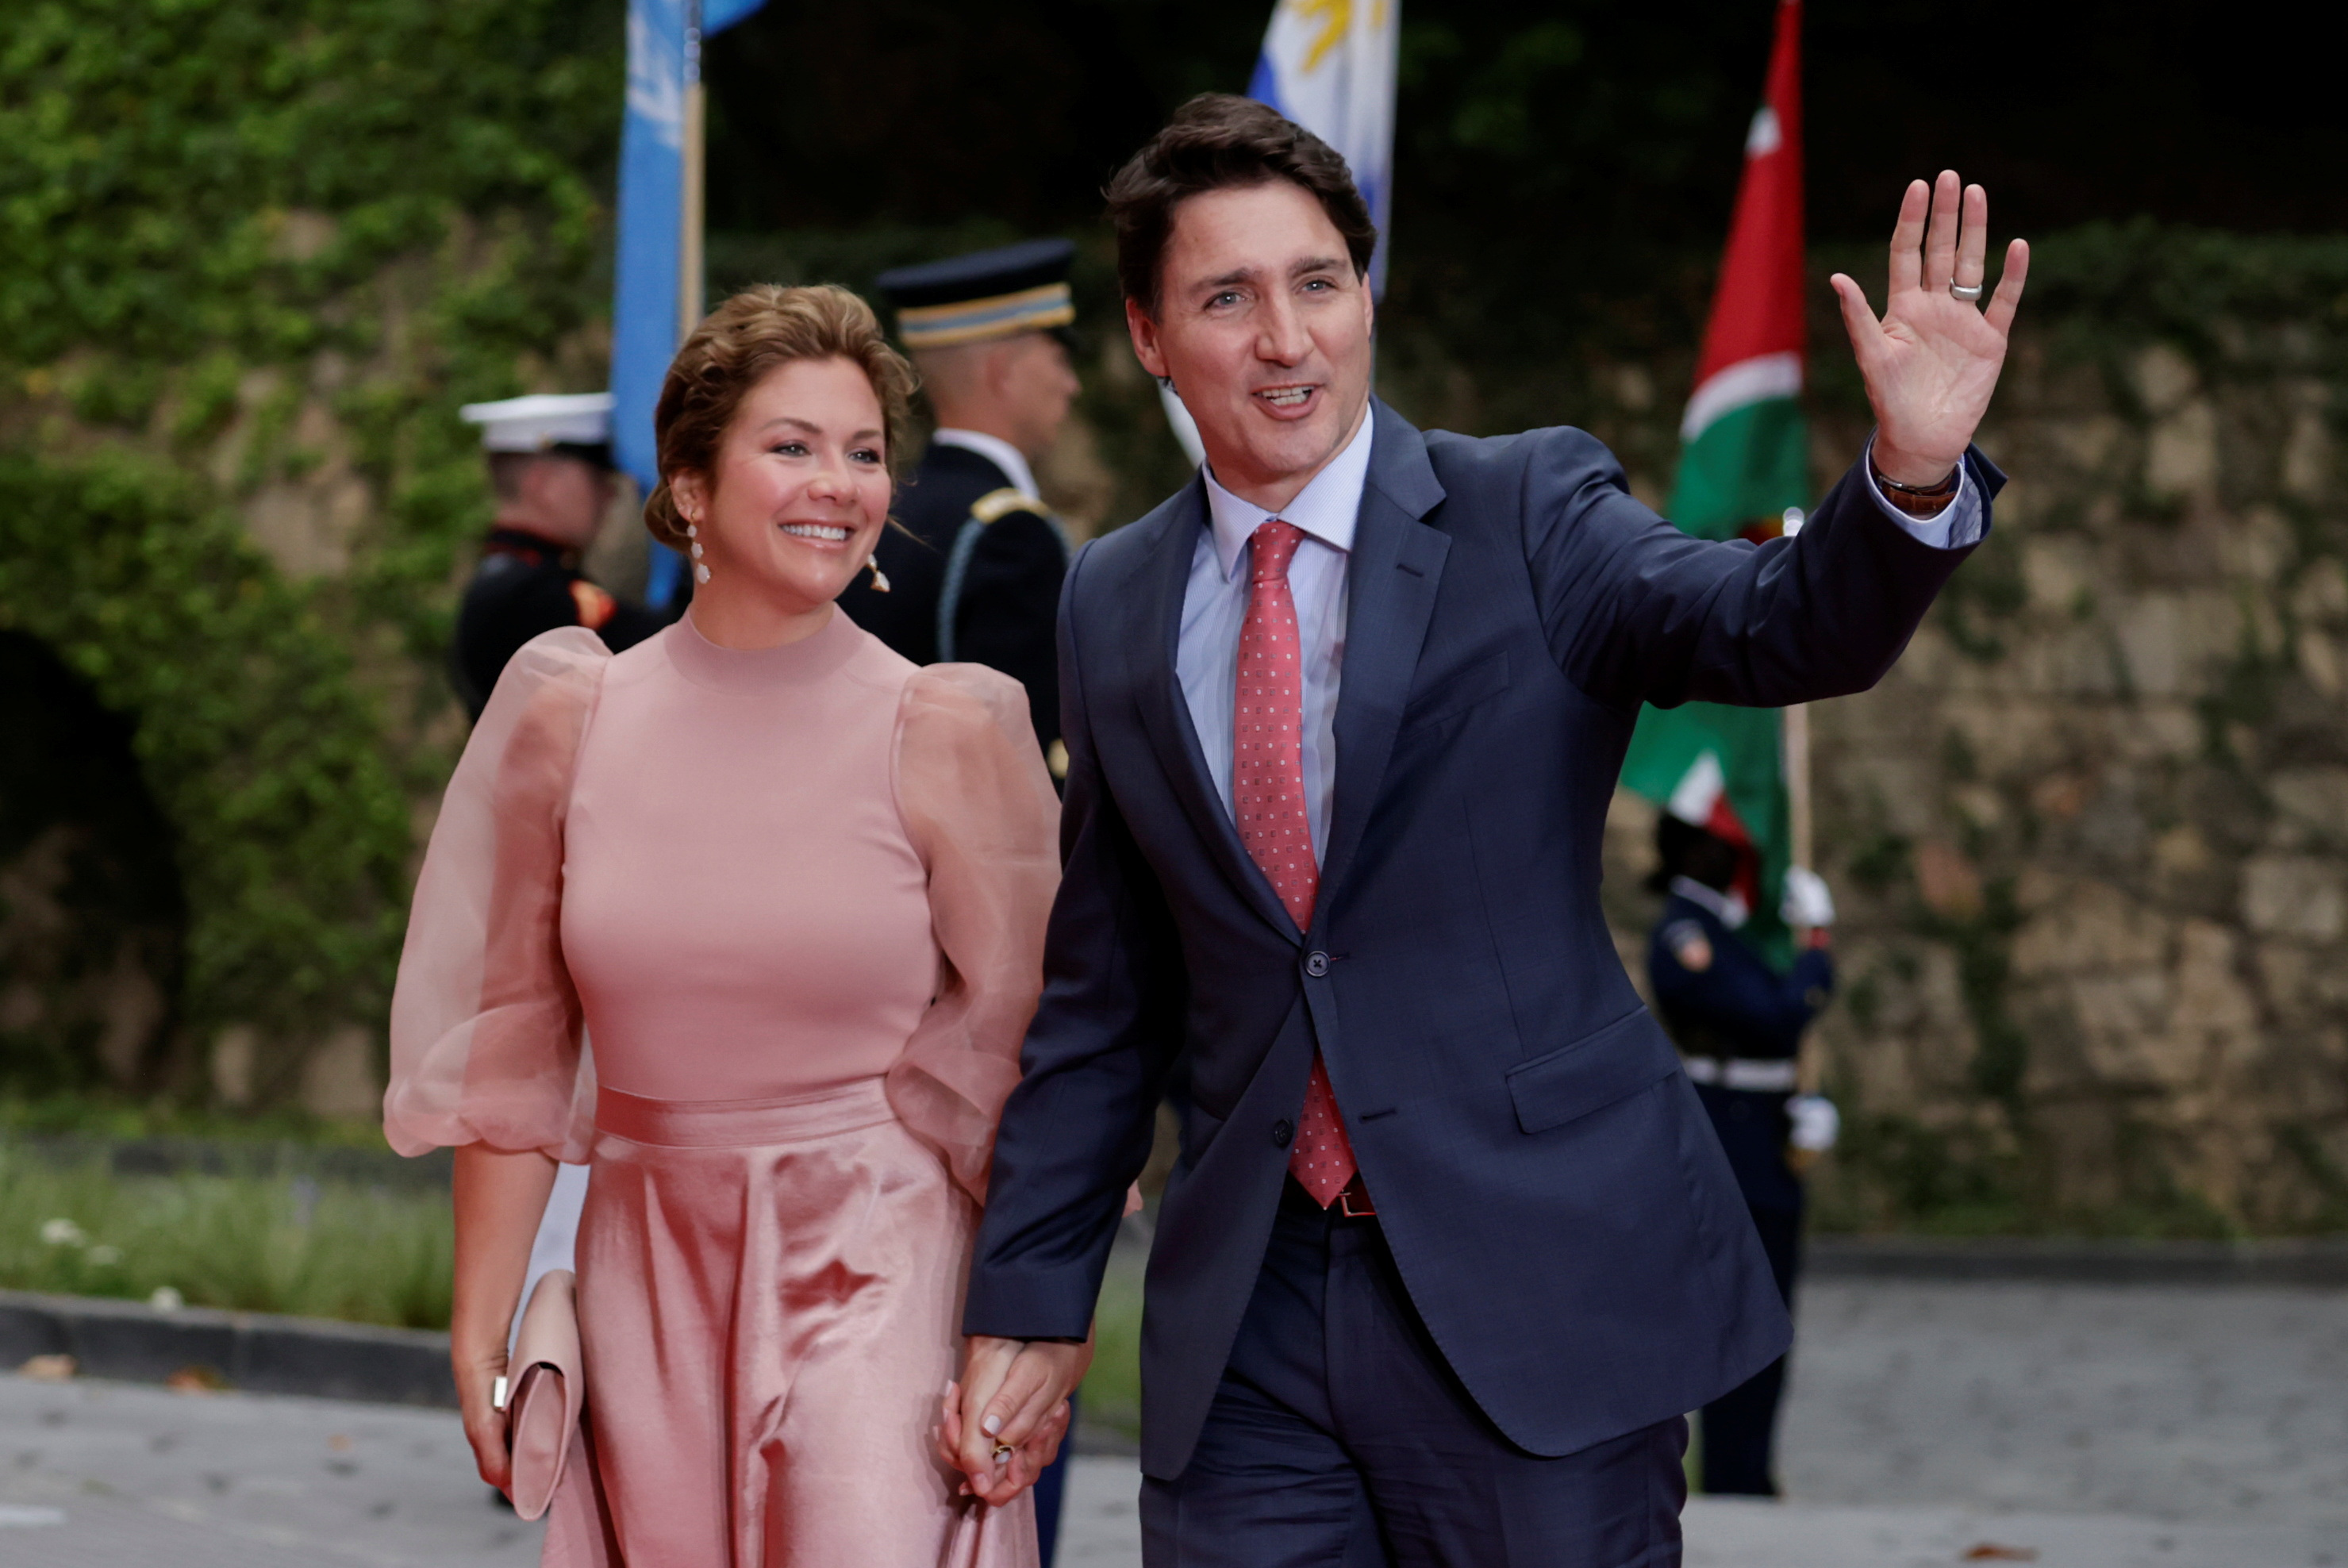 Justin and Sophie Trudeau separate after 18 years of marriage Reuters